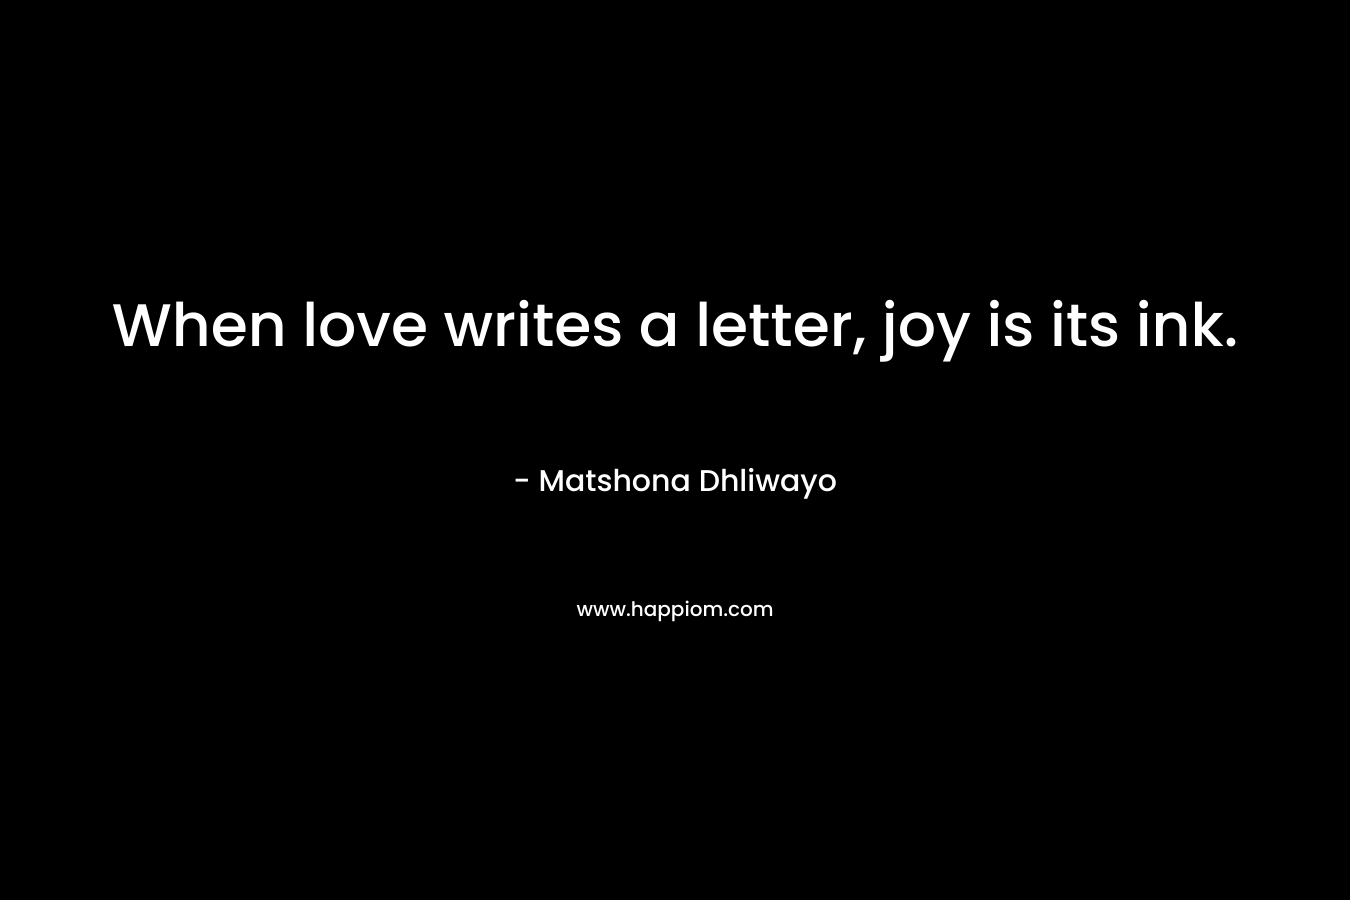 When love writes a letter, joy is its ink.